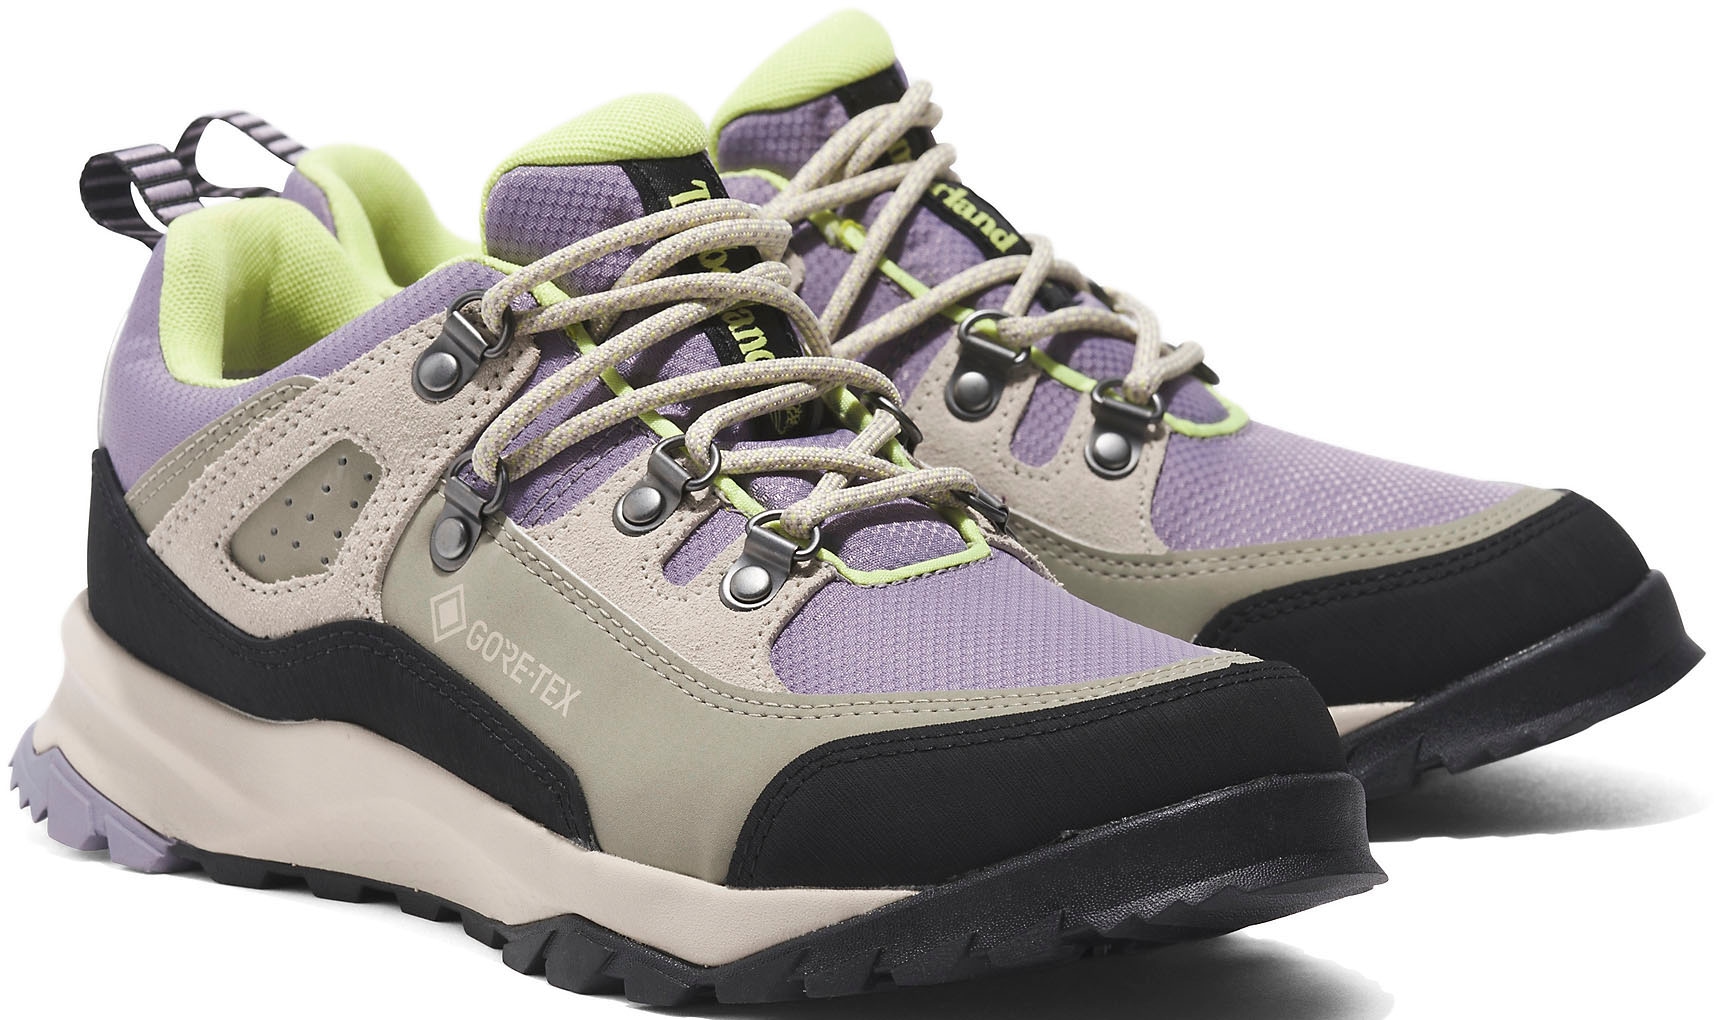 Timberland Outdoorschuh »Lincoln Peak LOW LACE UP GTX HIKING«